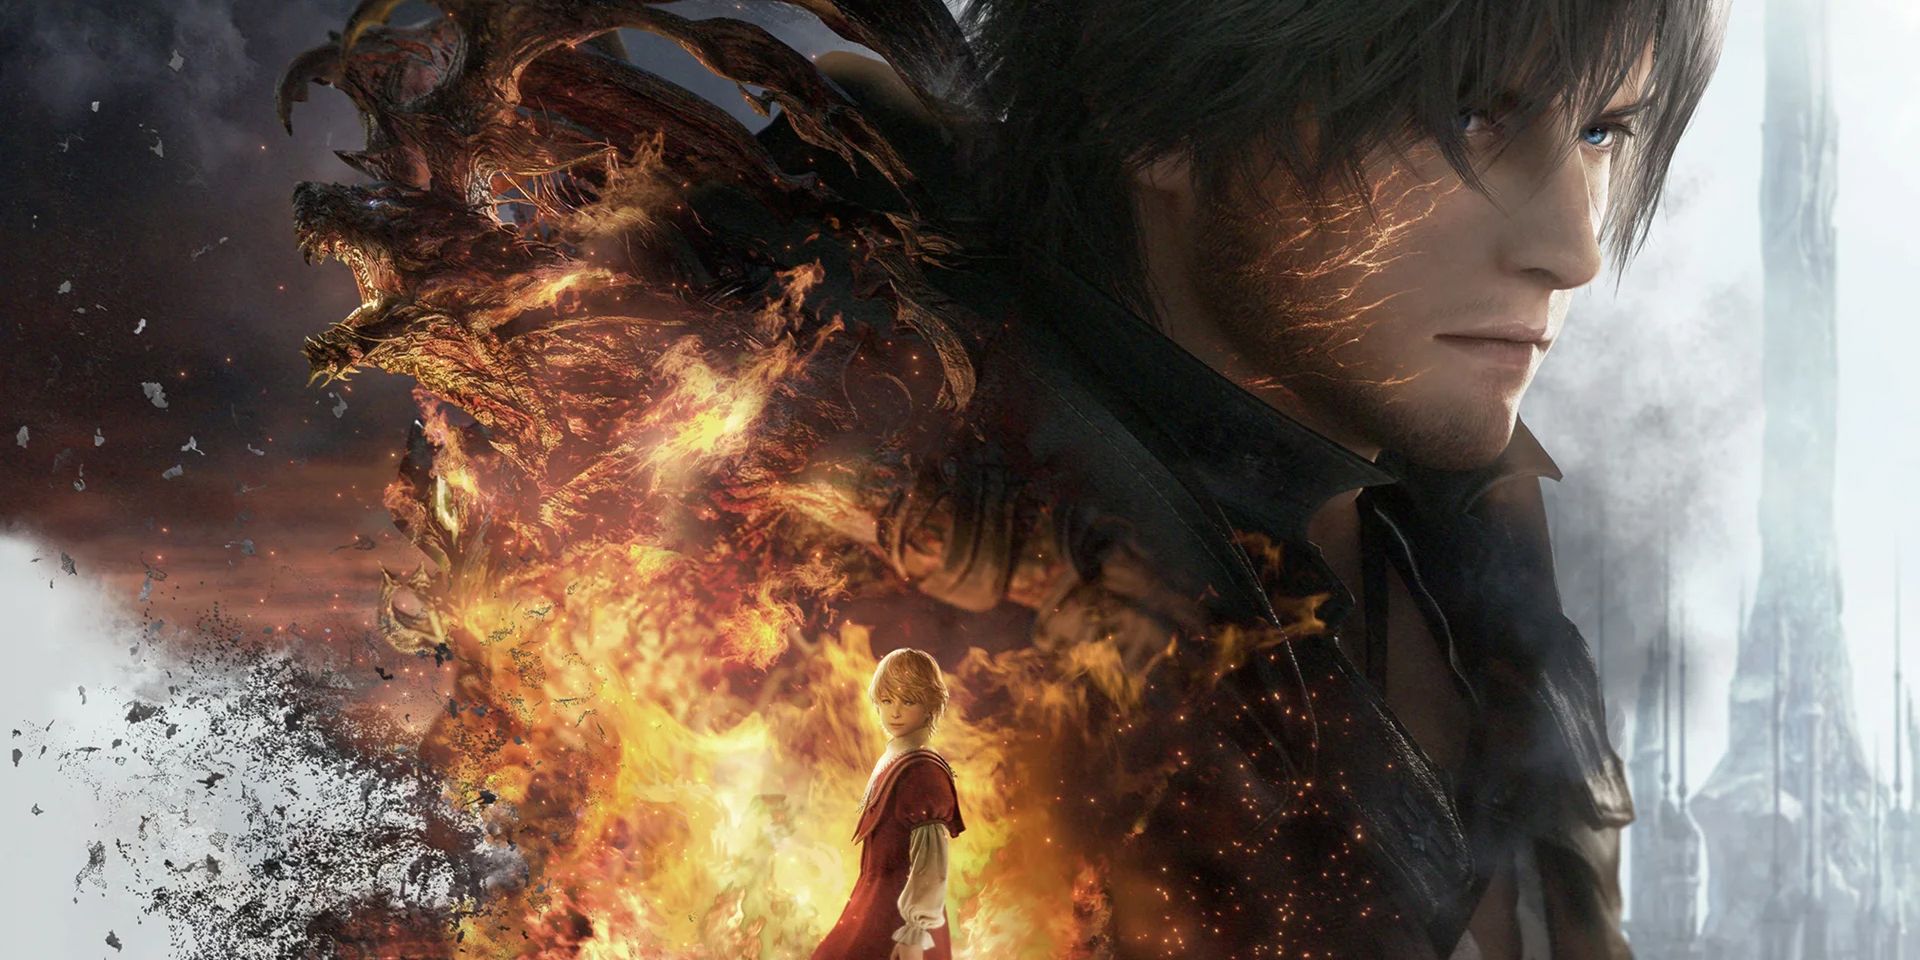 Final Fantasy 16 protagonist Clive looks into the distance;  his younger brother Joshua is superimposed, looking back, surrounded by flames